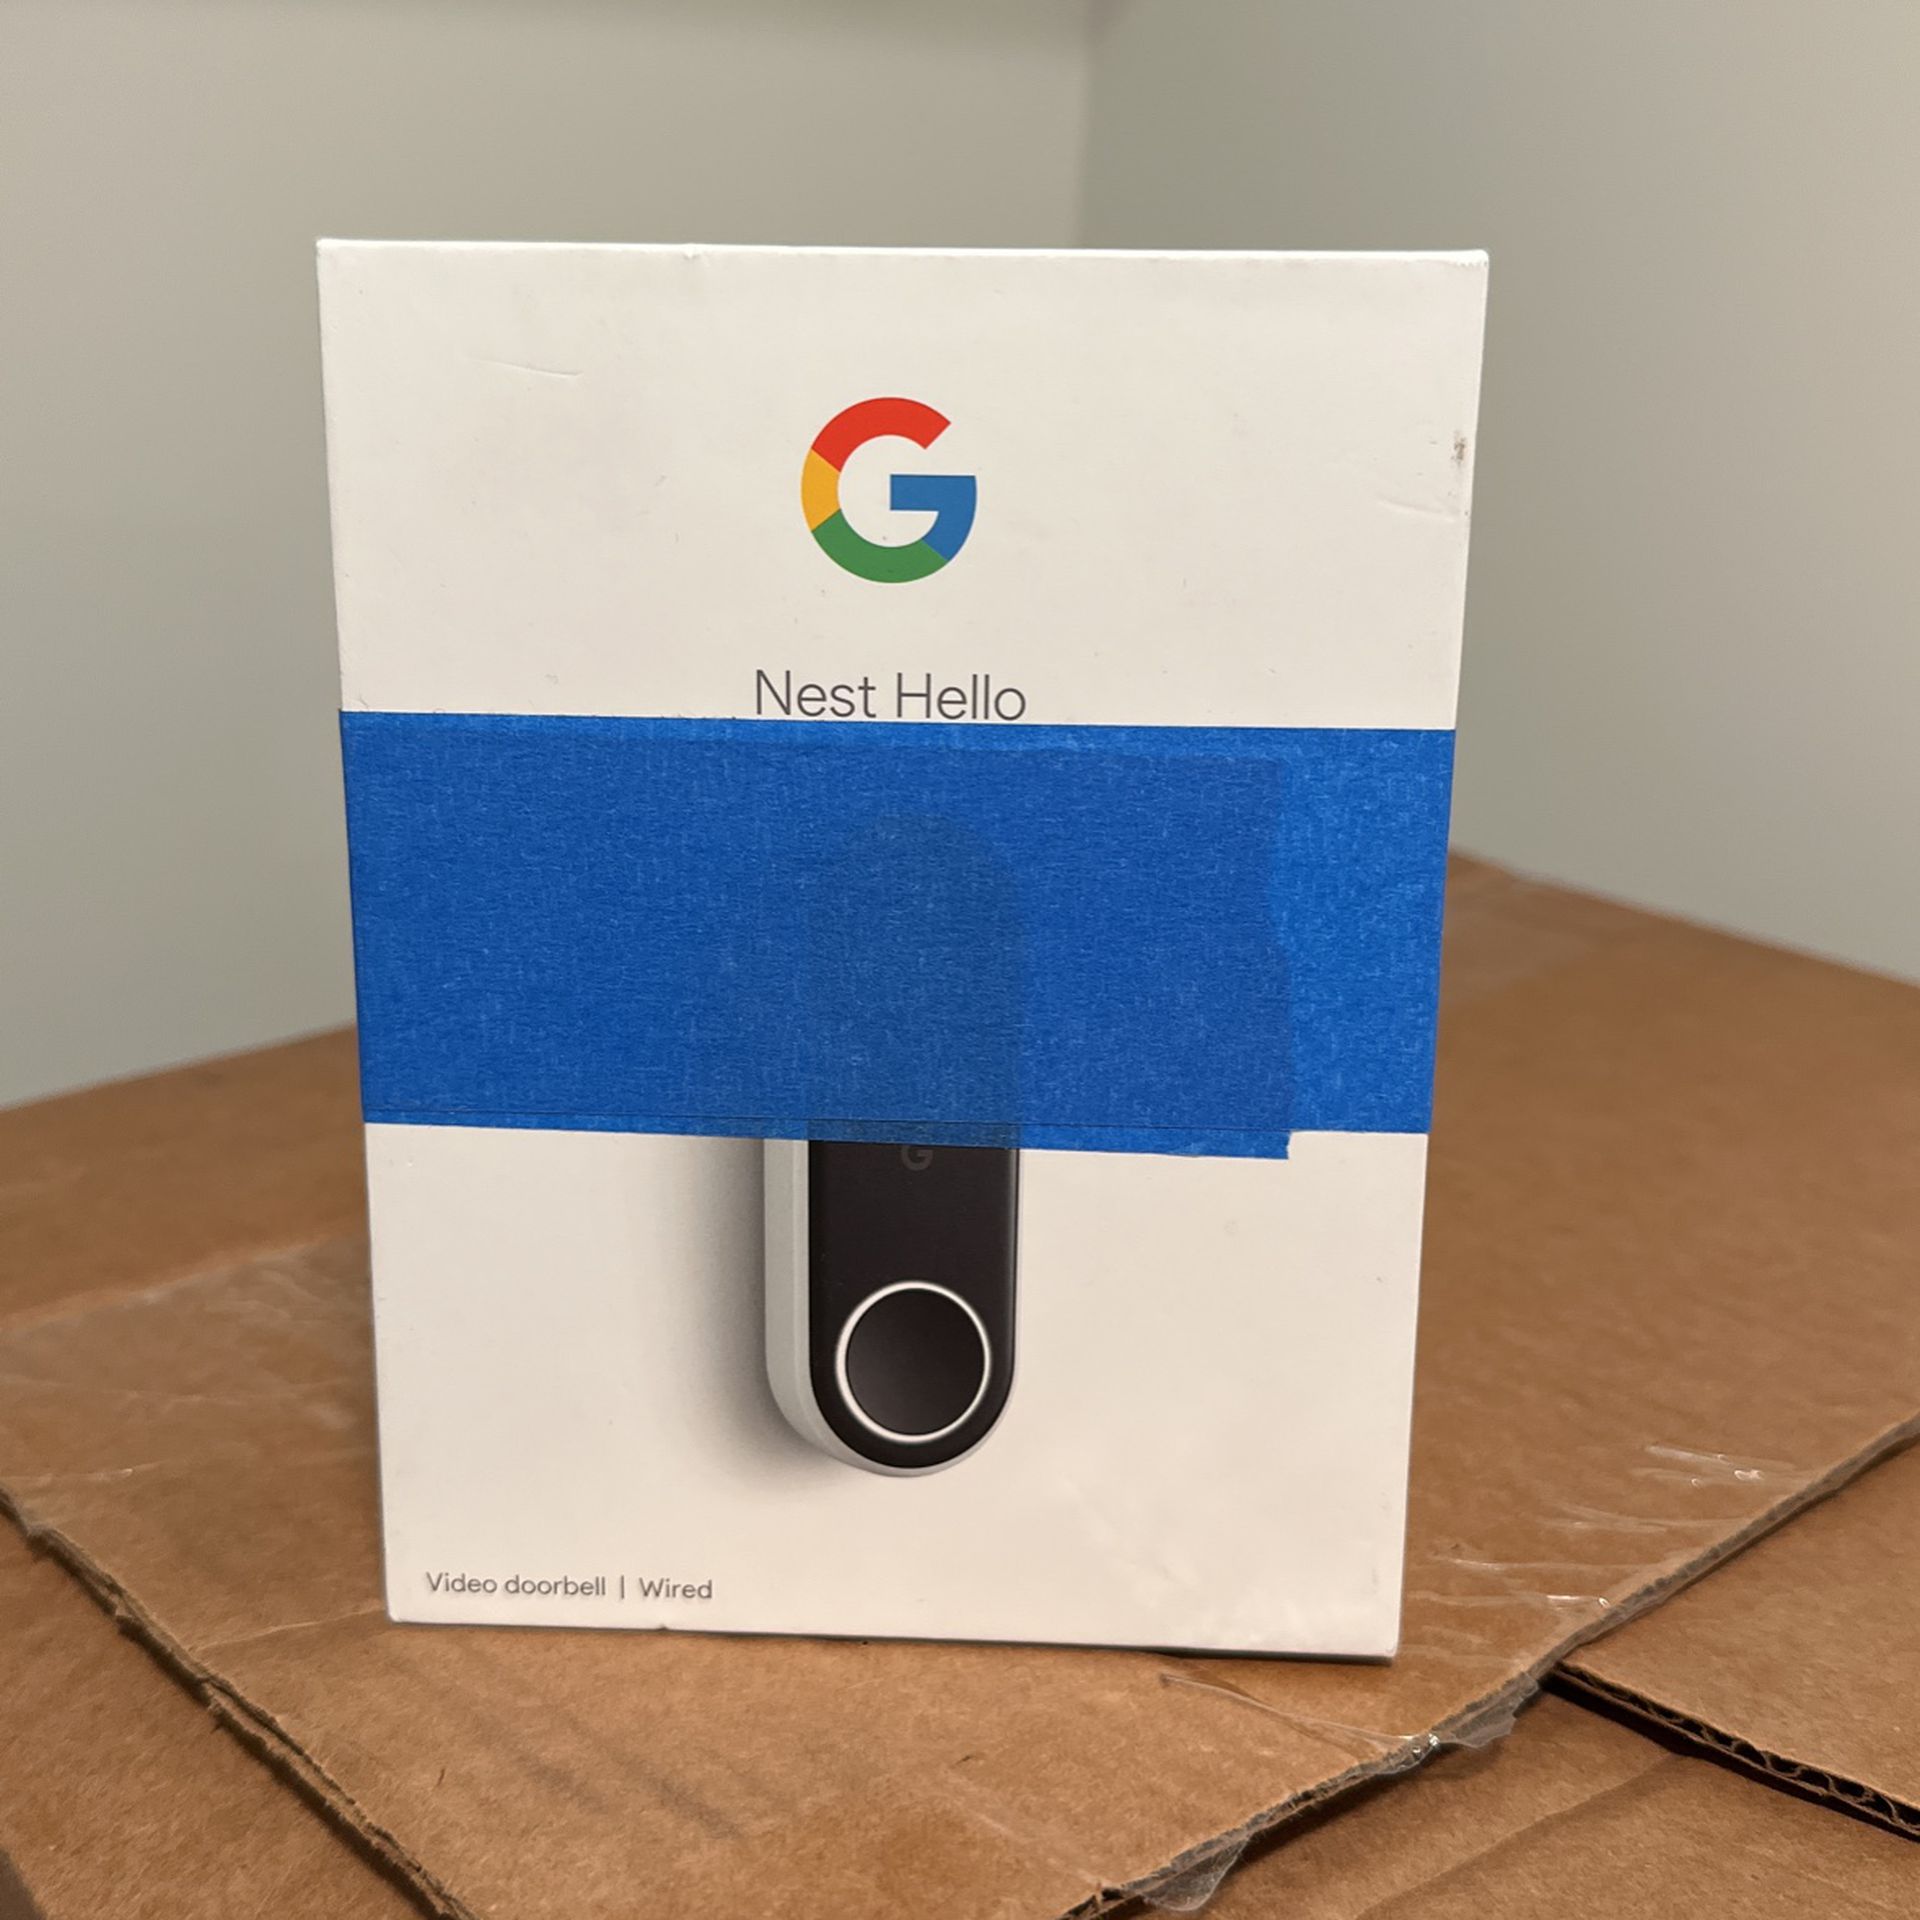 Google Nest Doorbell (Wired) - Formerly Nest Hello - Video Doorbell with 24/7 Streaming - Smart Doorbell Camera for Home with HDR Video, HD Talk and L